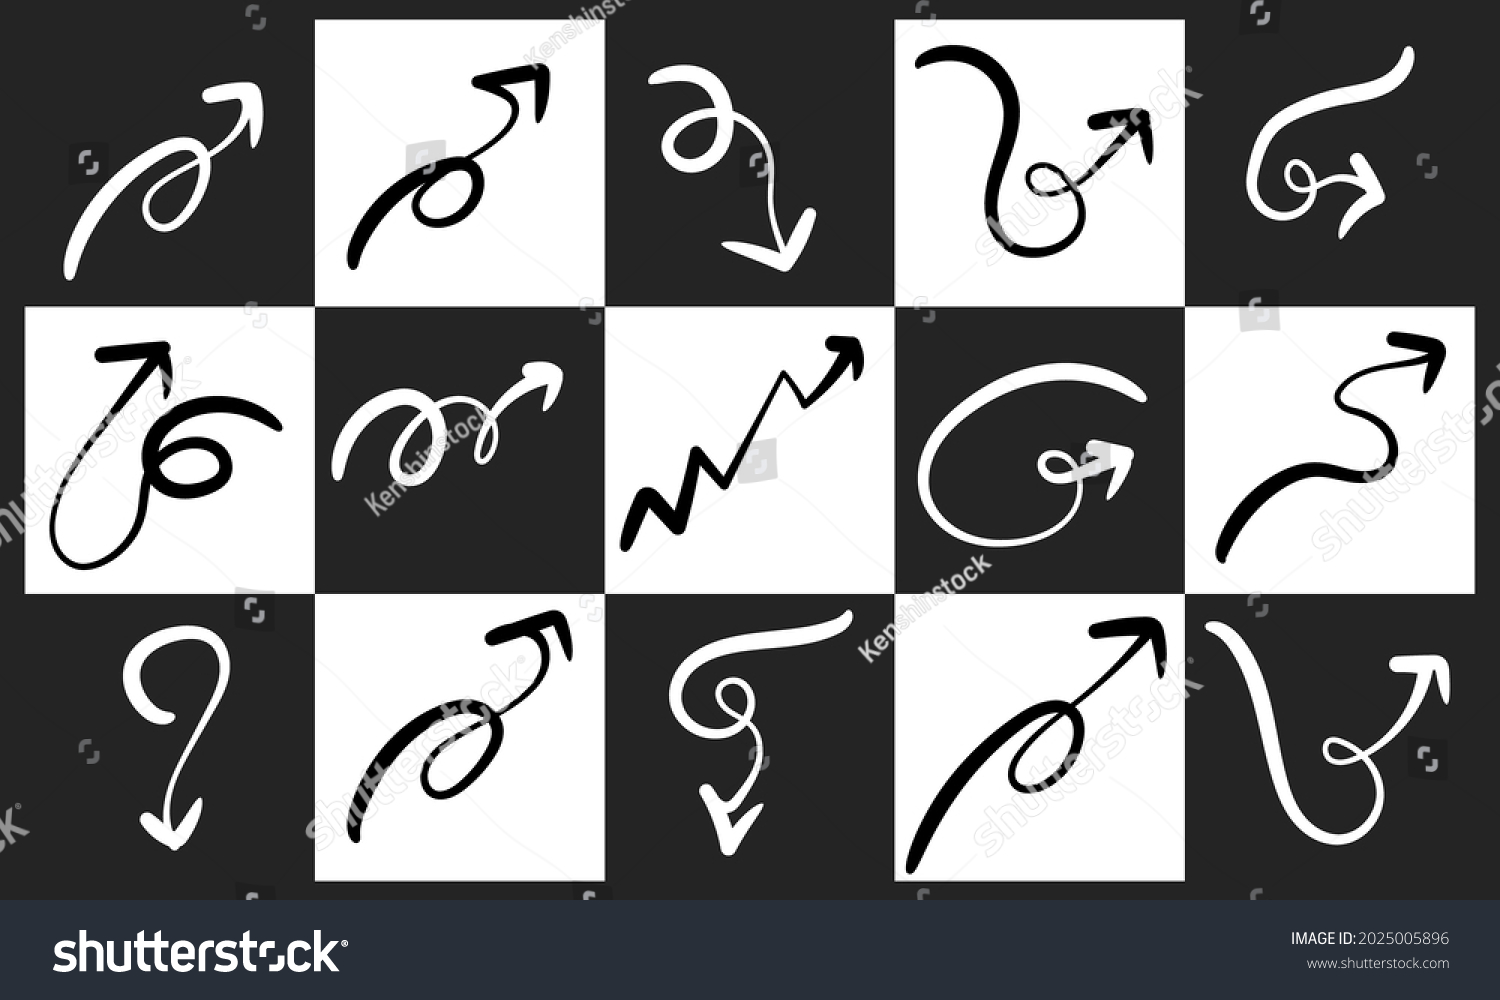 Set Vector Curved Arrows Hand Drawn Stock Vector Royalty Free 2025005896 Shutterstock 8291